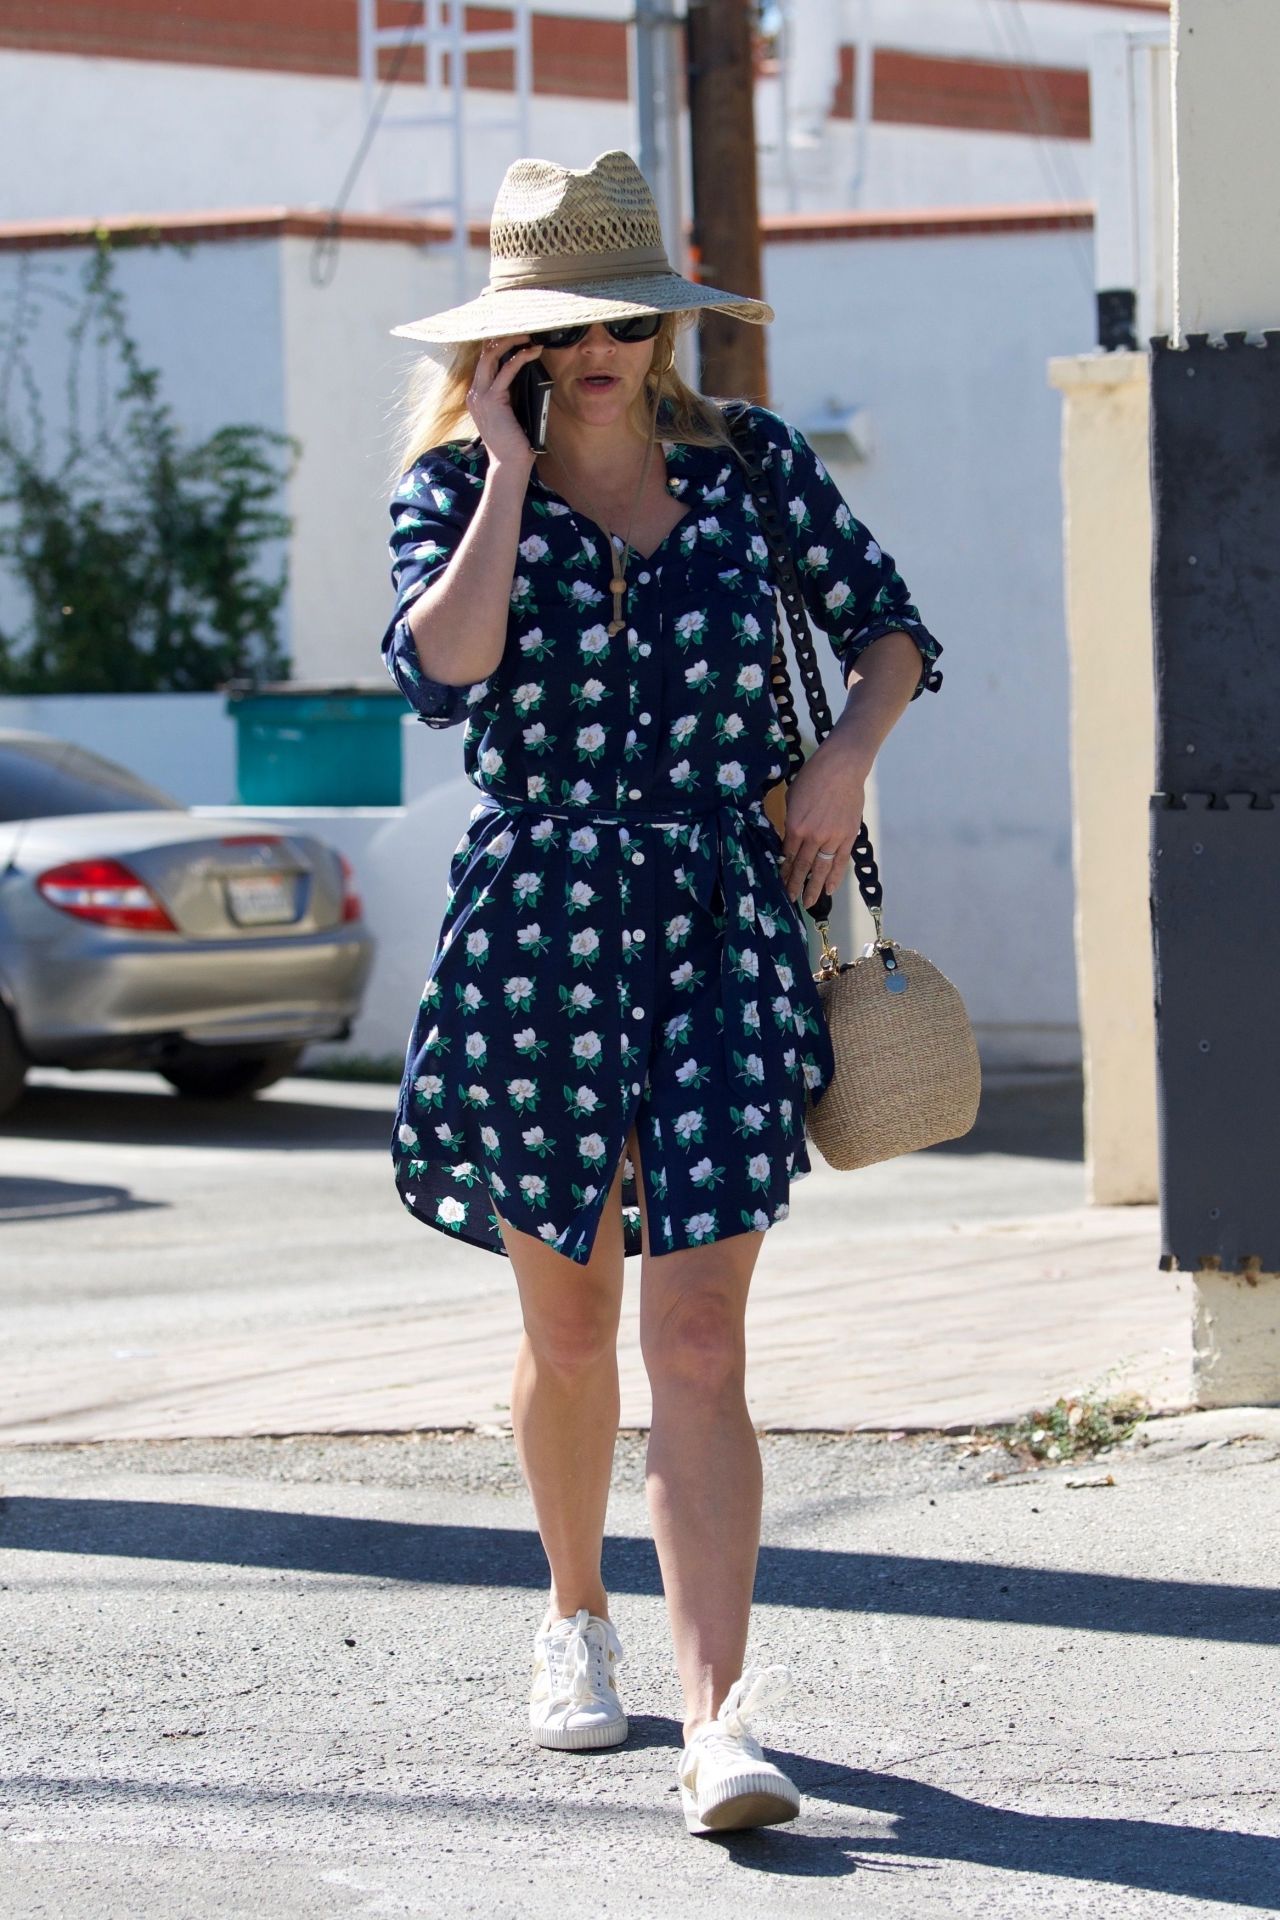 reese-witherspoon-at-the-beauty-park-medical-spa-in-santa-monica-10-20-2018-4.jpg